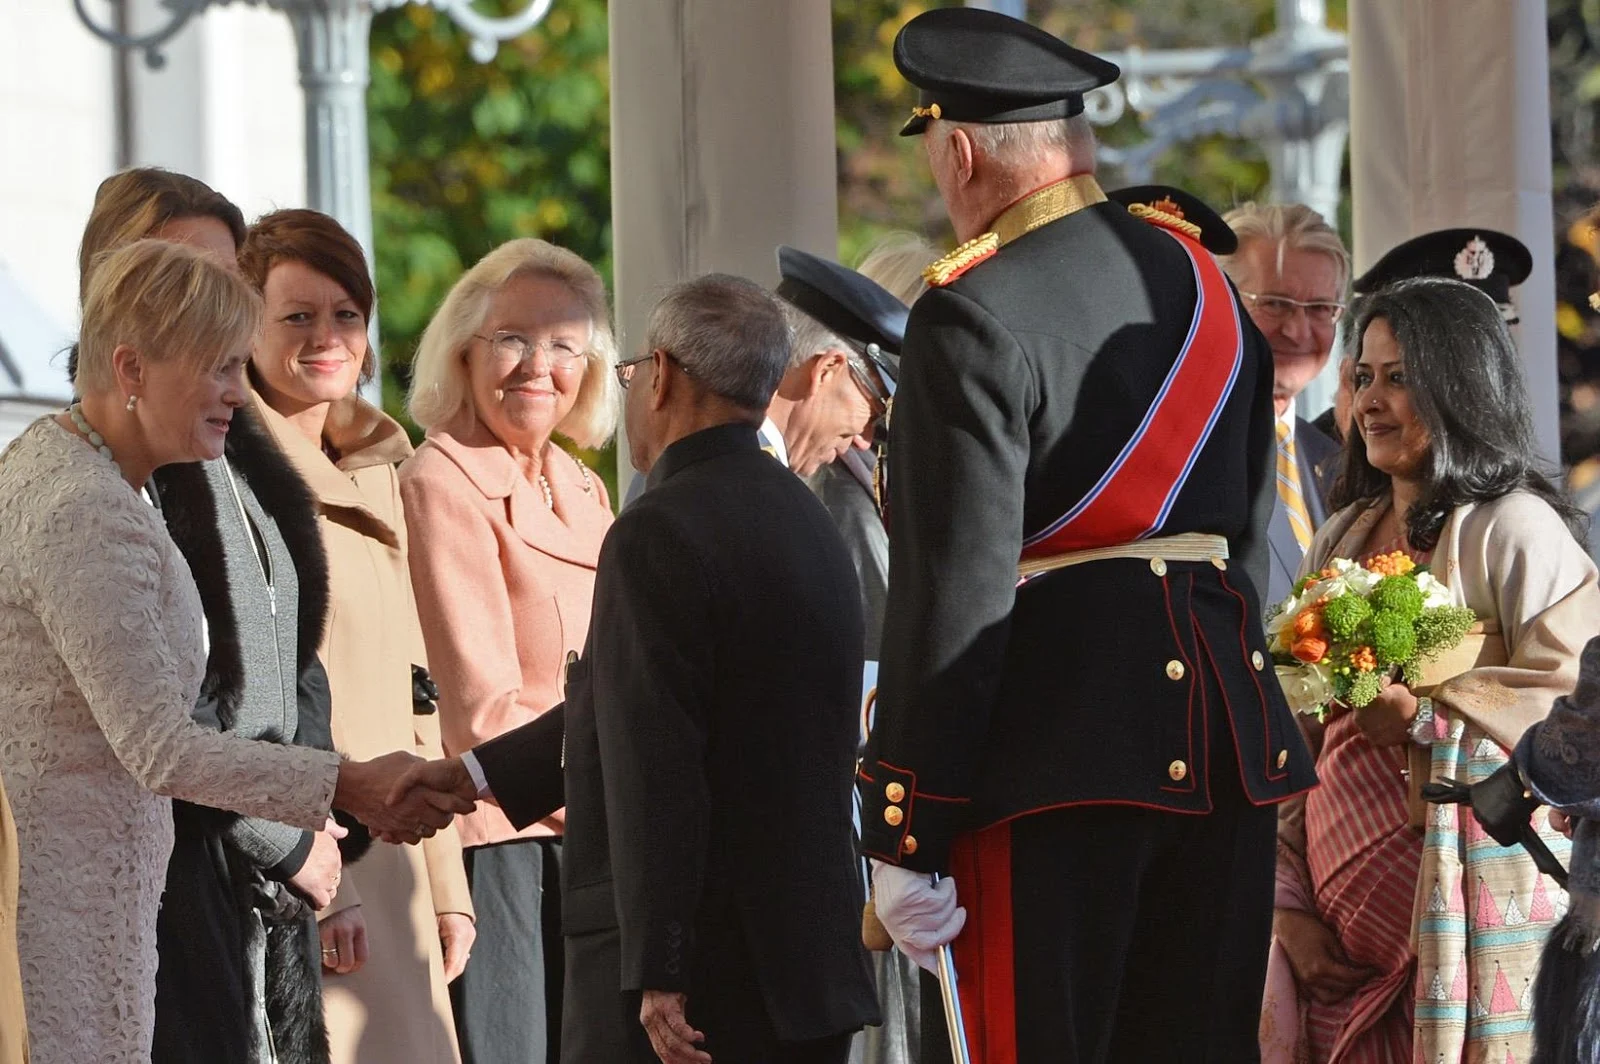 Norwegian Royal Family welcome the President of India, Pranab Mukherjee and his daughter, Sharmistha Mukherjee to Norway on the first day of their state visit to the country.